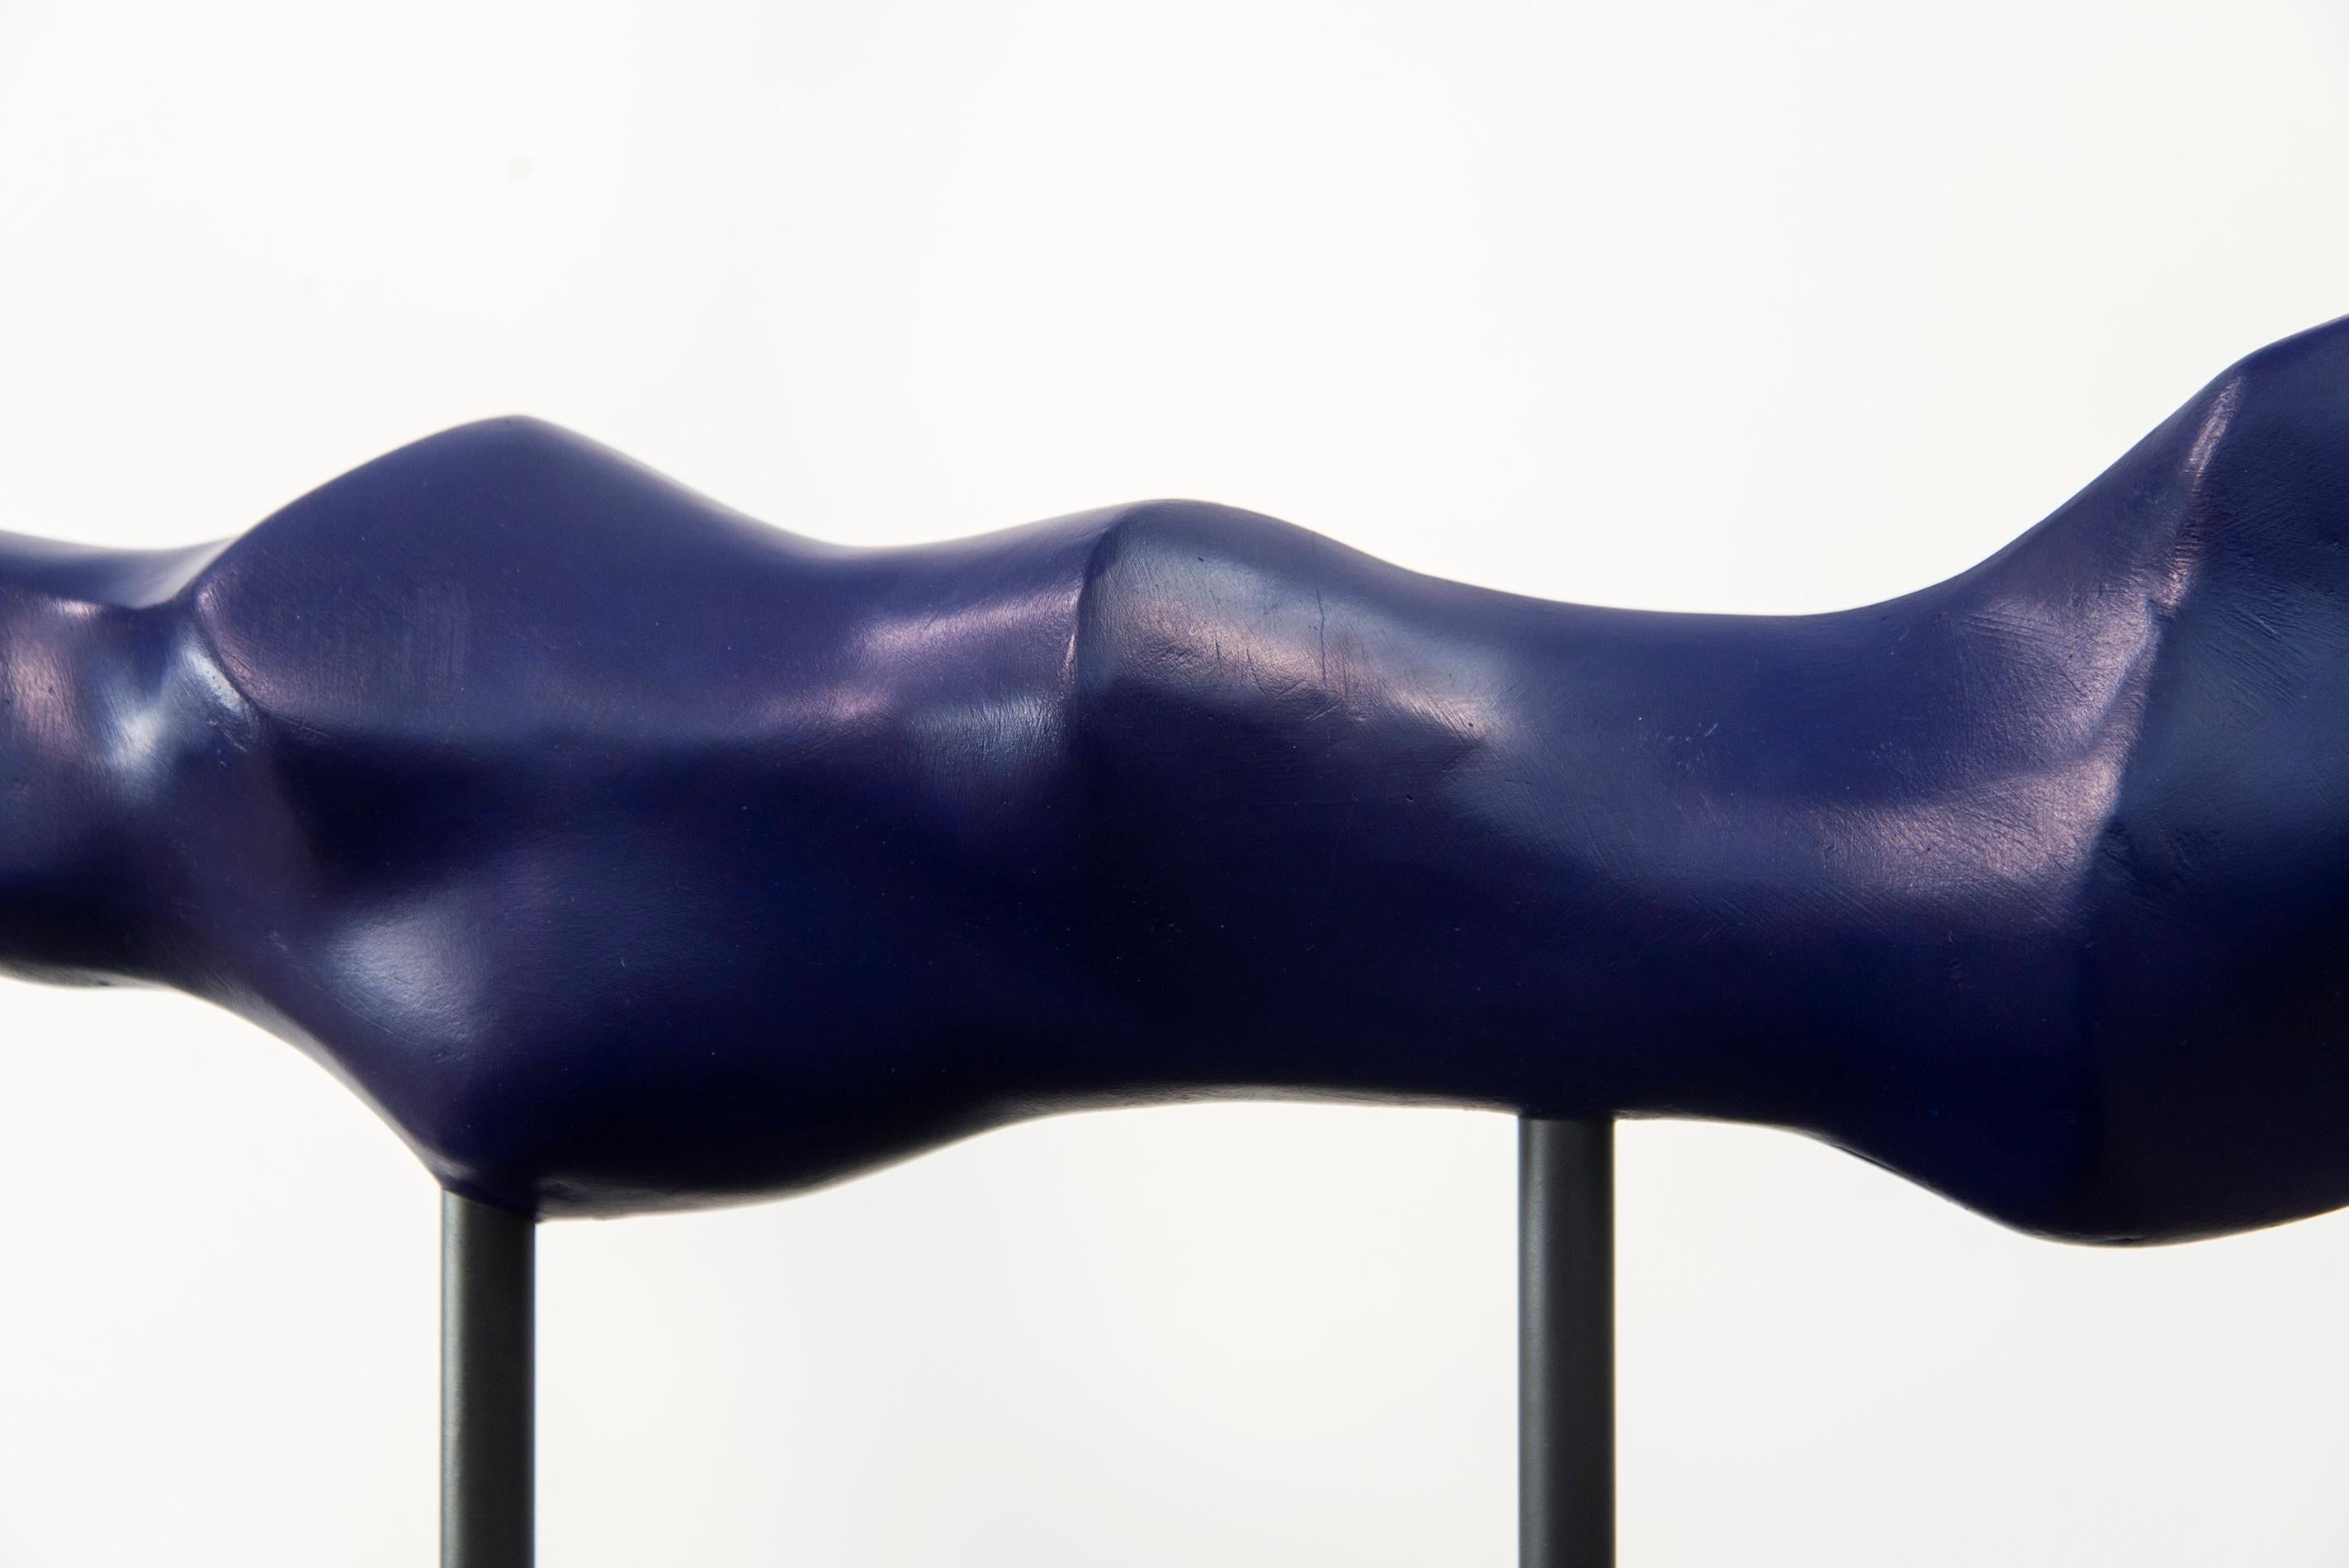 Biomorphic Blue No 11 - smooth, pigmented Winterstone, abstract sculpture For Sale 3